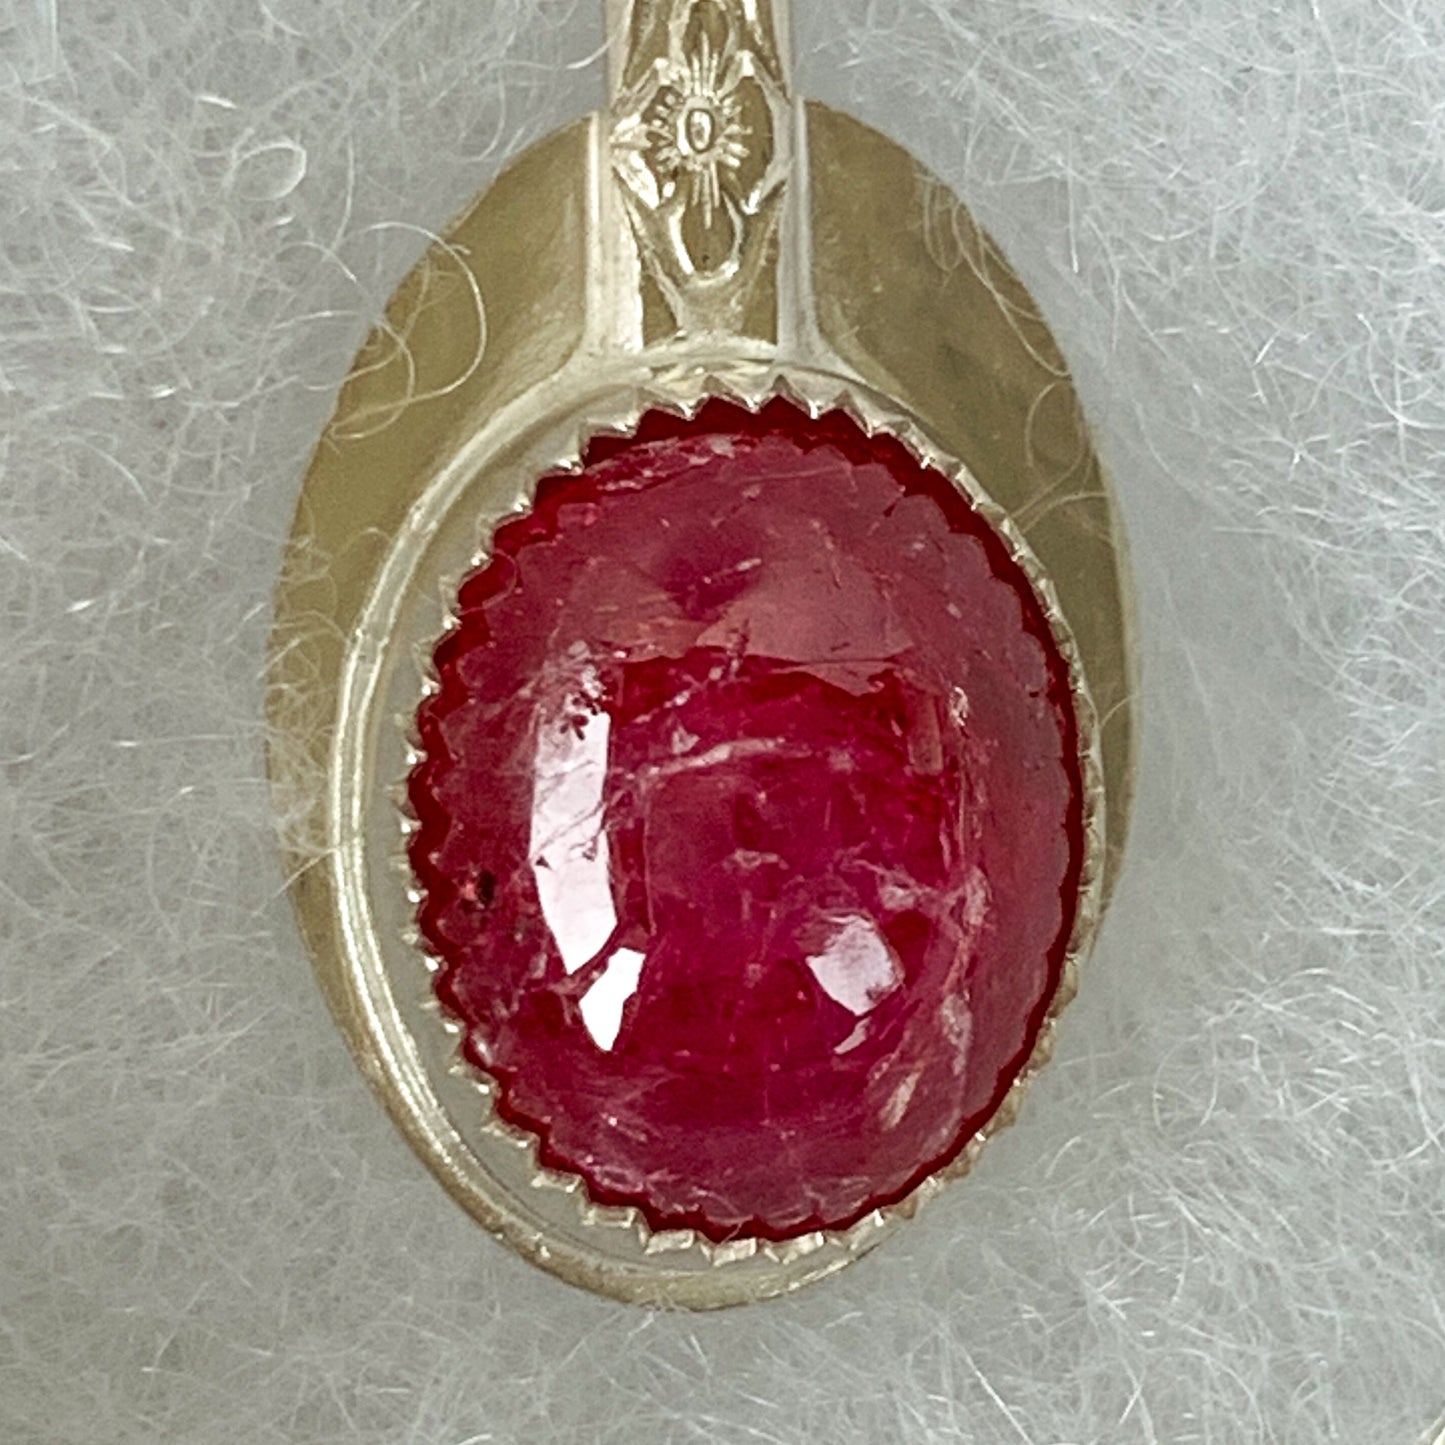 Natural ruby necklace